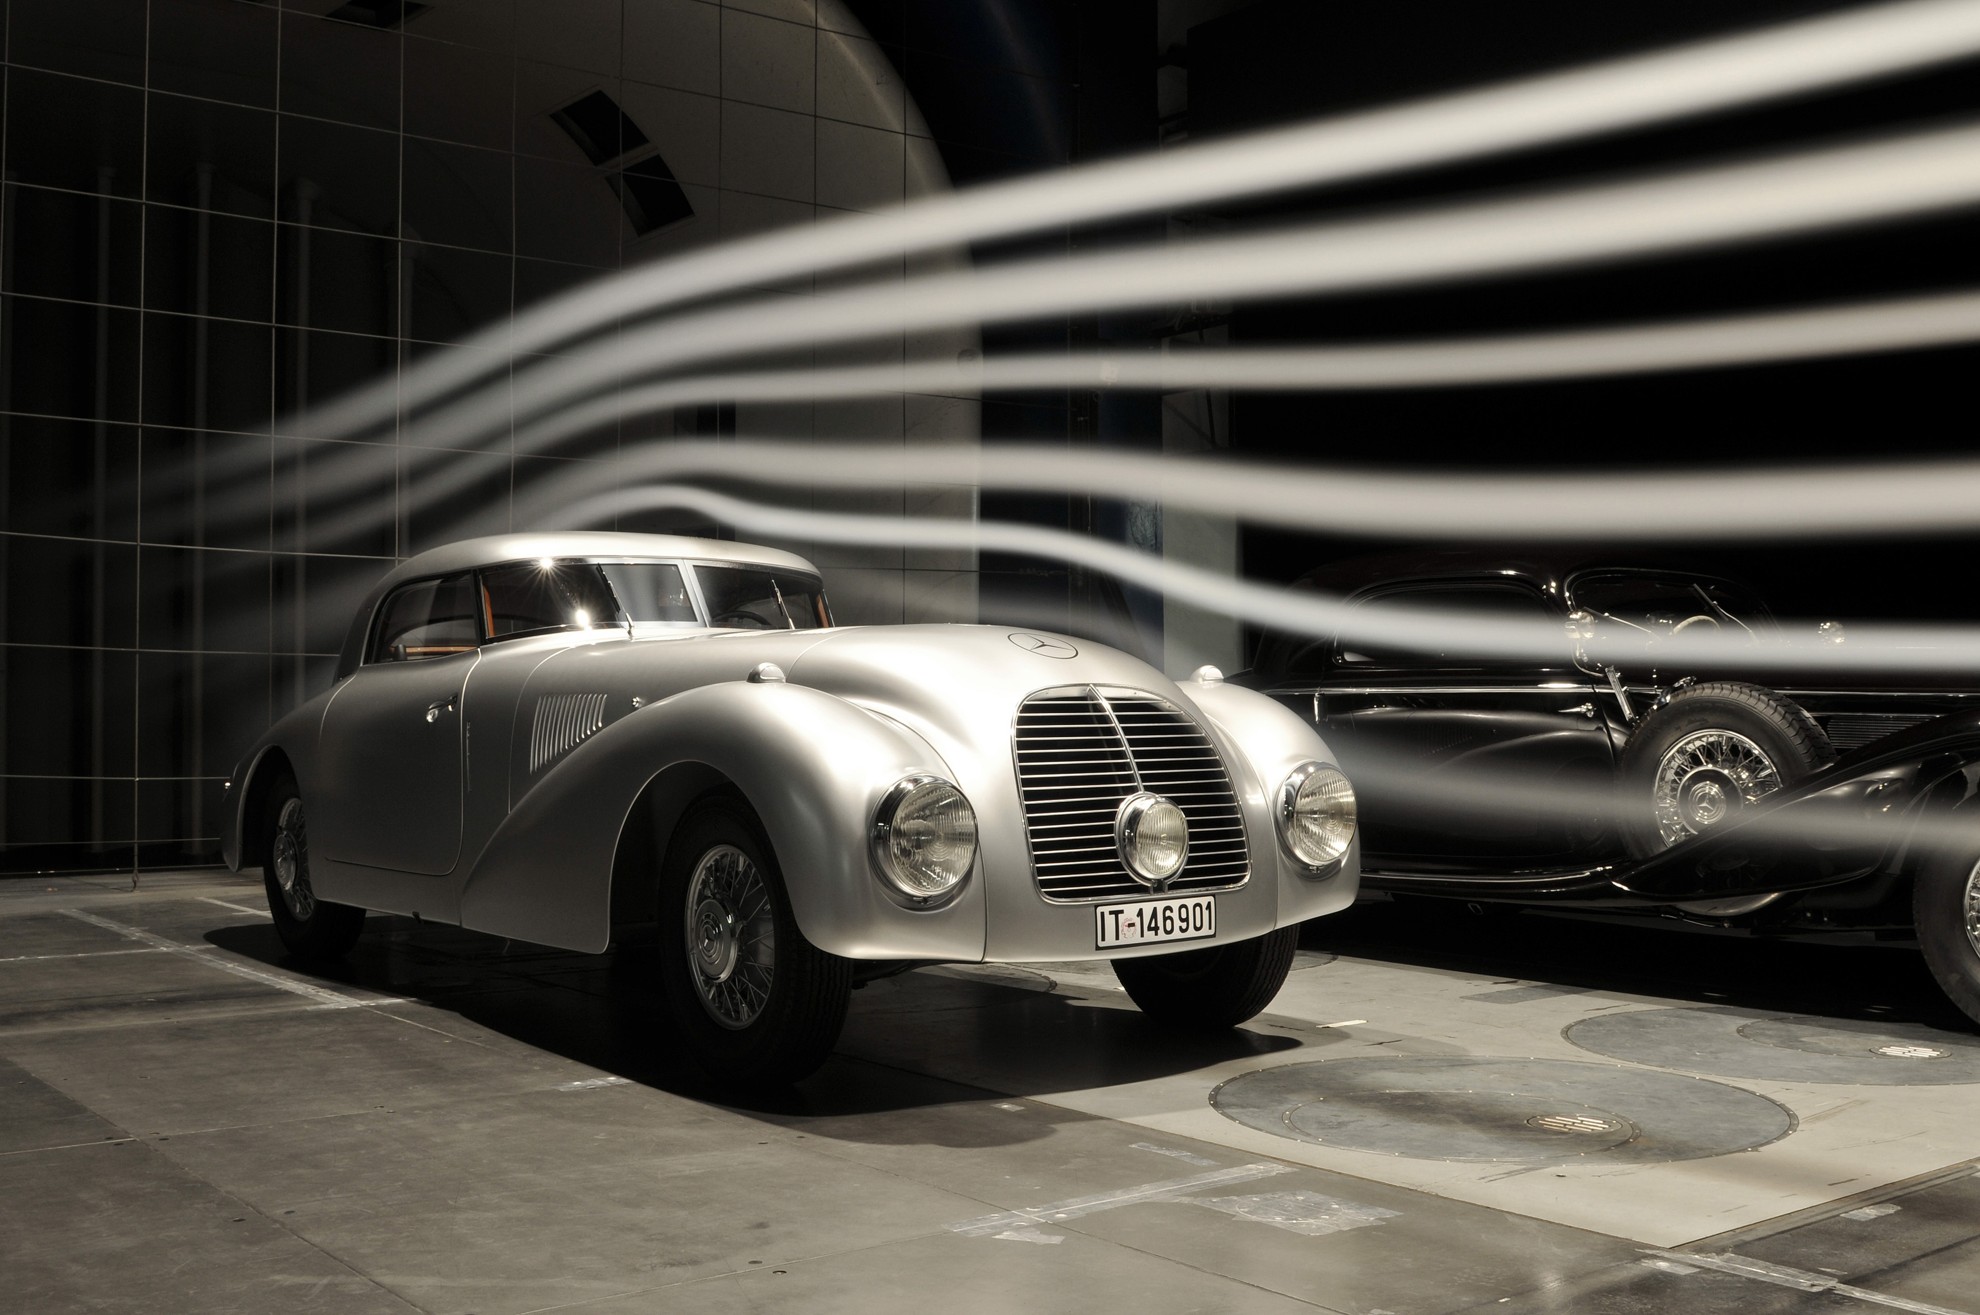 Mercedes-Benz 540 K Streamliner: Ahead of its time